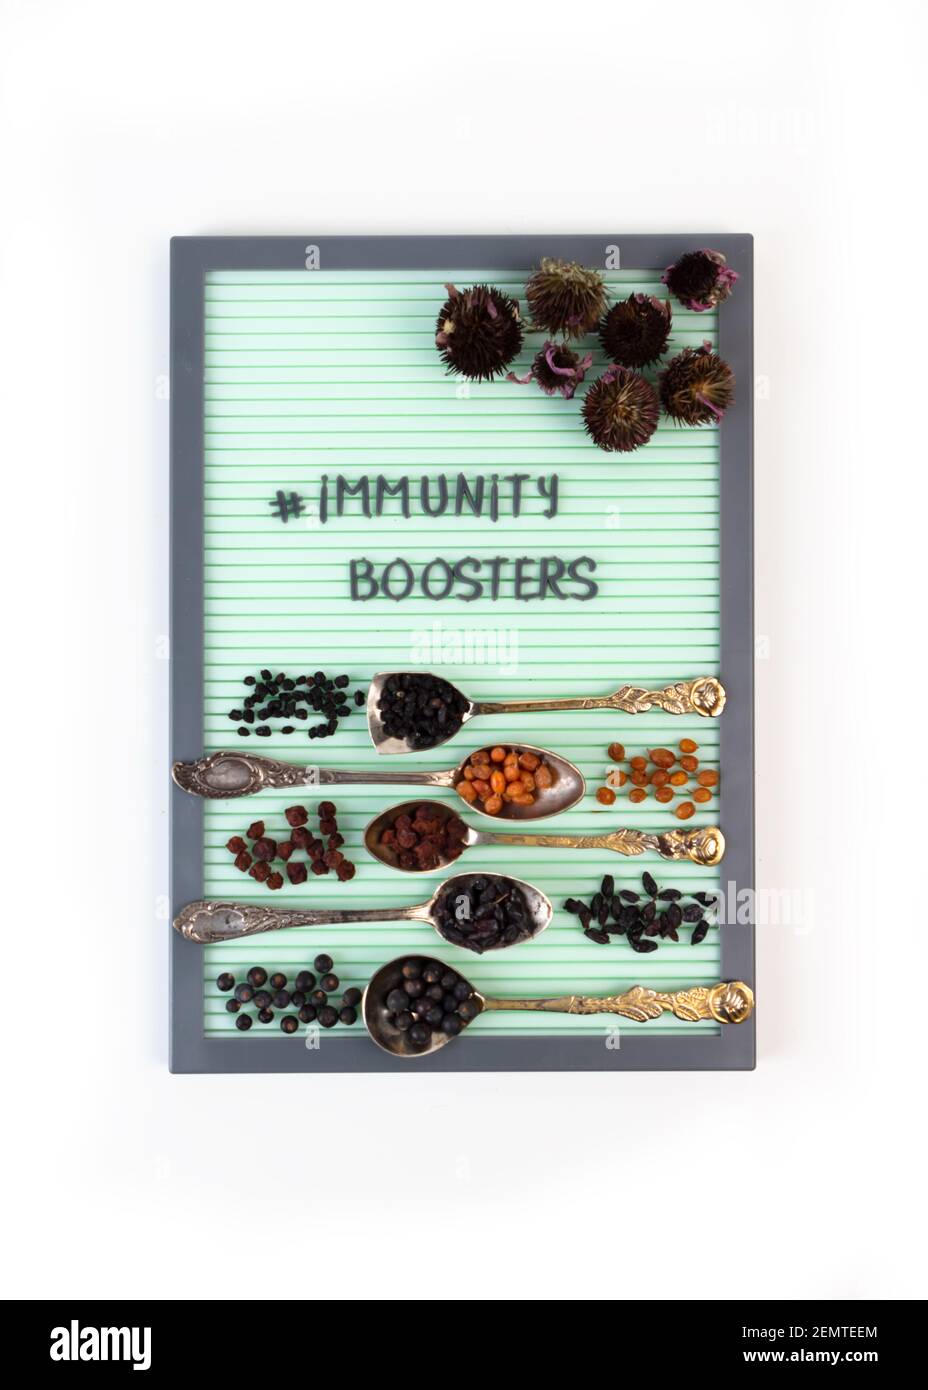 Immunity boosters concept. Functional nutrition to support a healthy immune system. Herbal supplements and dried berries to boost immunity. Stock Photo